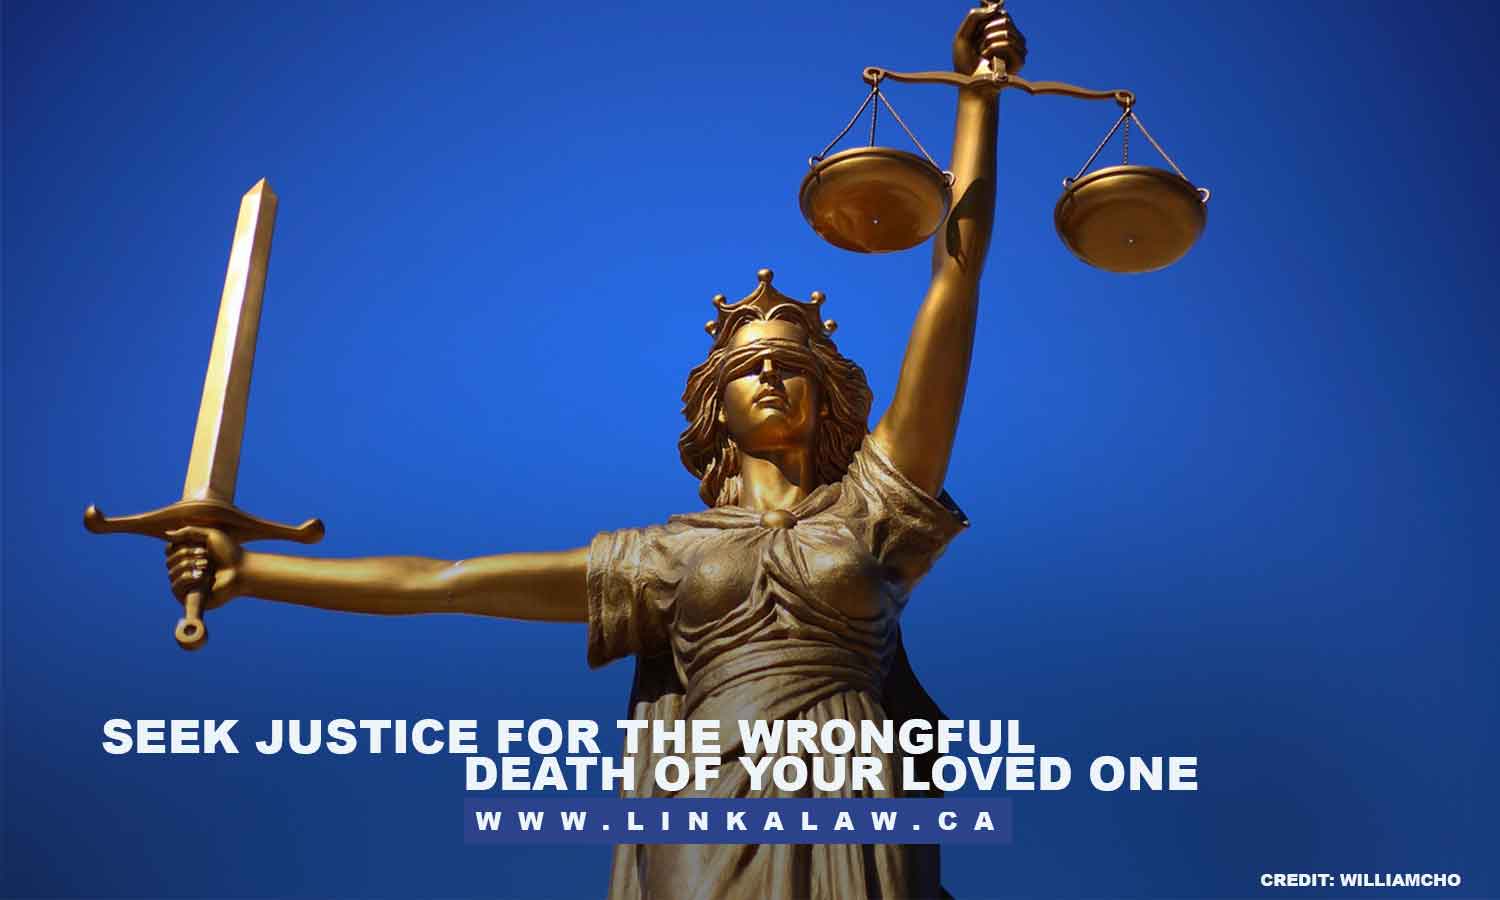 Seek justice for the wrongful death of your loved one